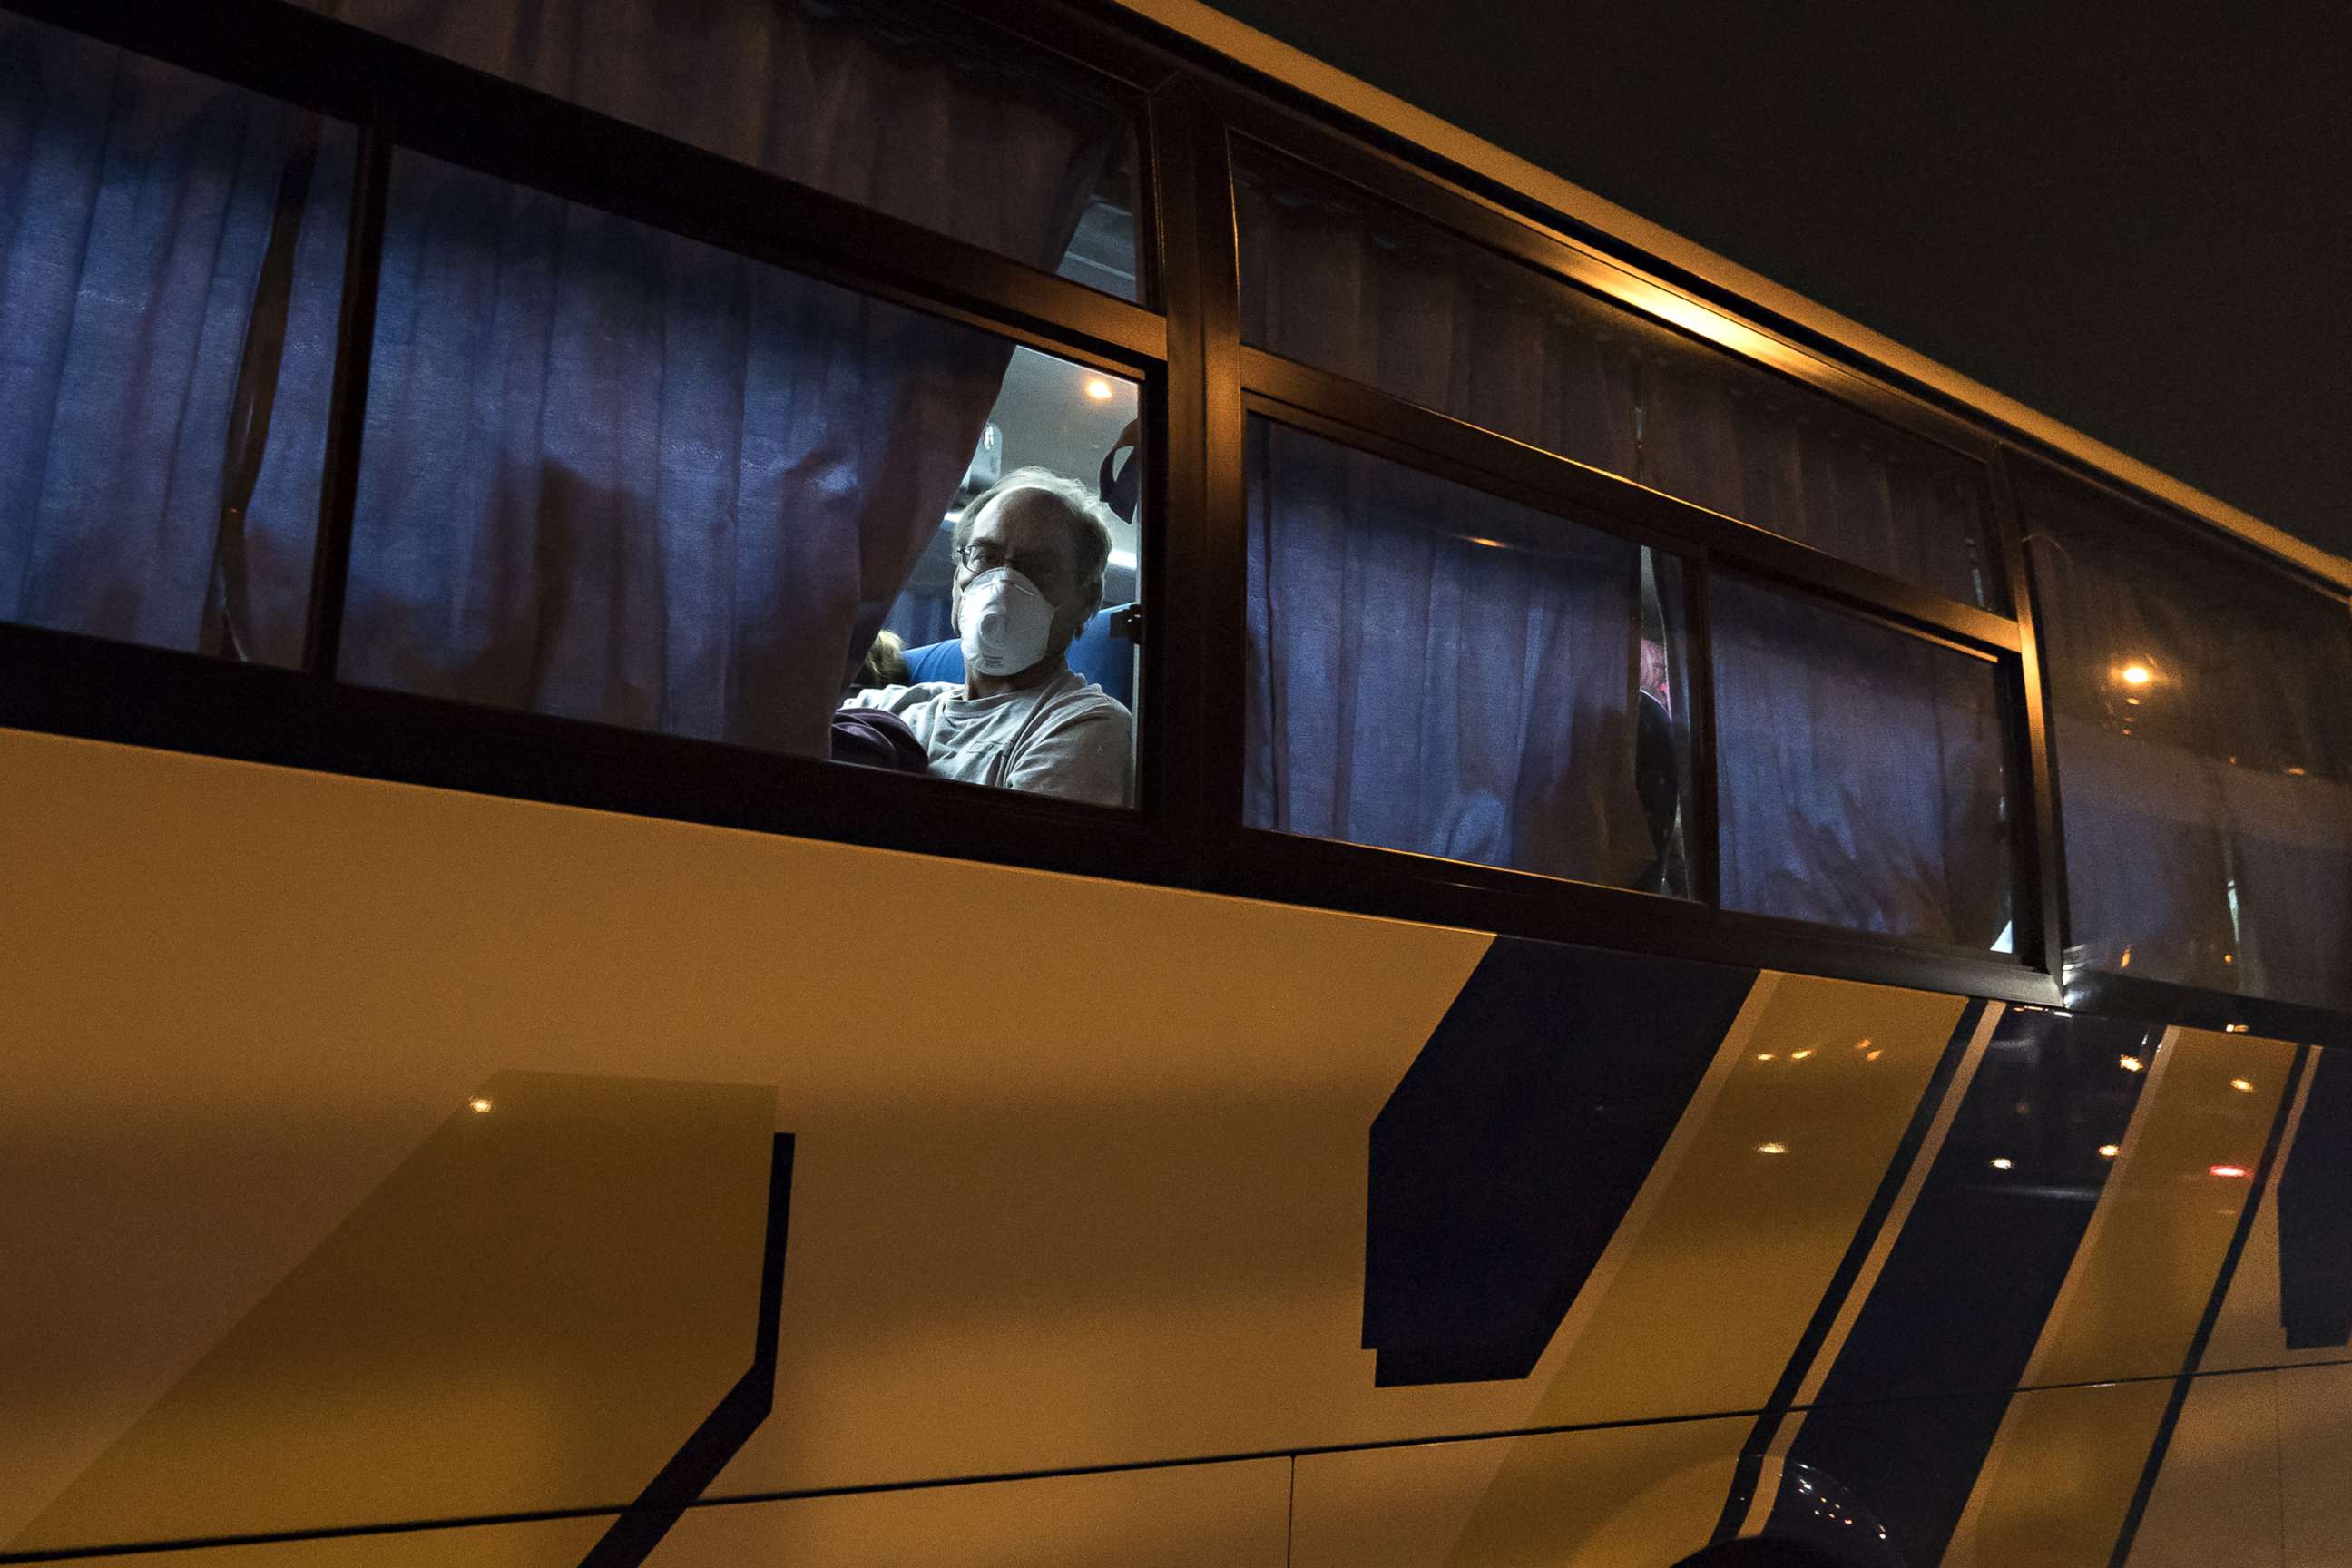 PHOTO: American citizens arrive by bus from the quarantined Diamond Princess cruise ship to Haneda airport on Feb. 17, 2020 in Tokyo to be repatriated to the U.S